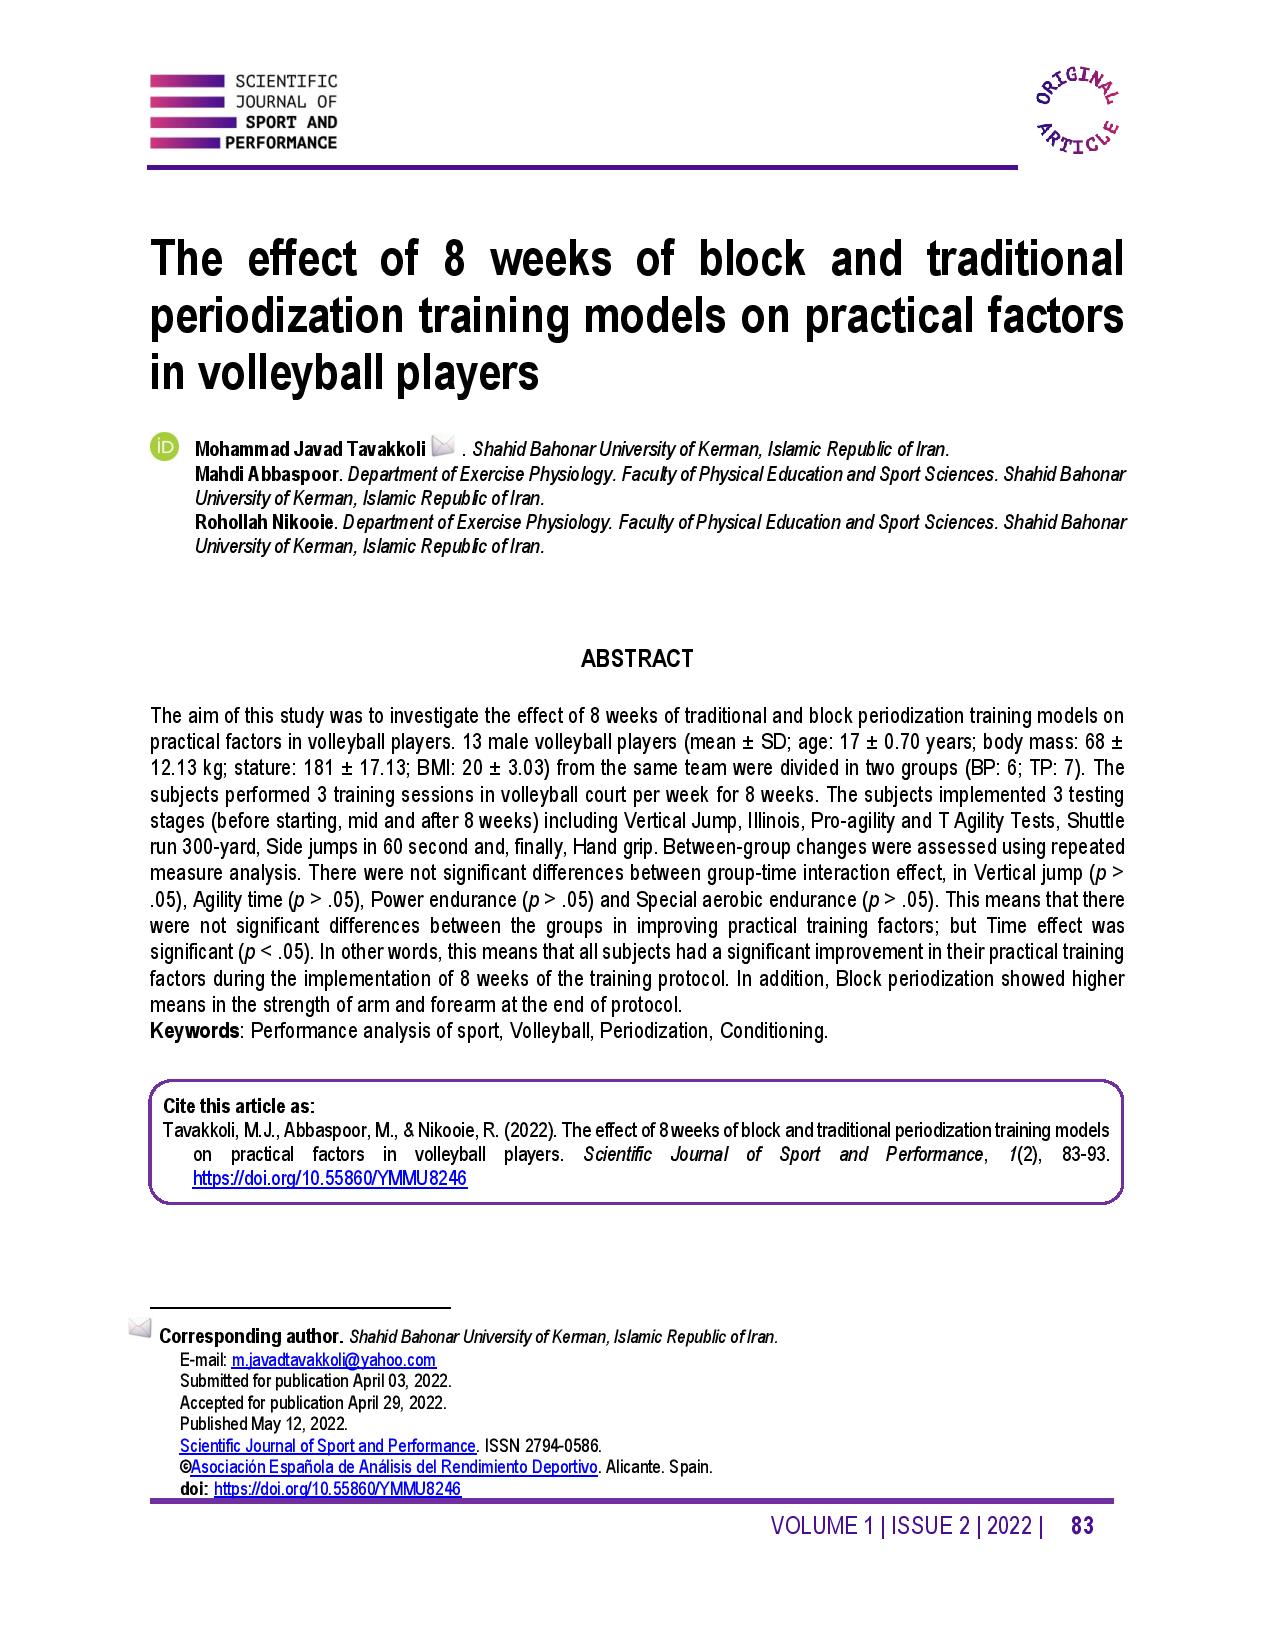 The effect of 8 weeks of block and traditional periodization training models on practical factors in volleyball players